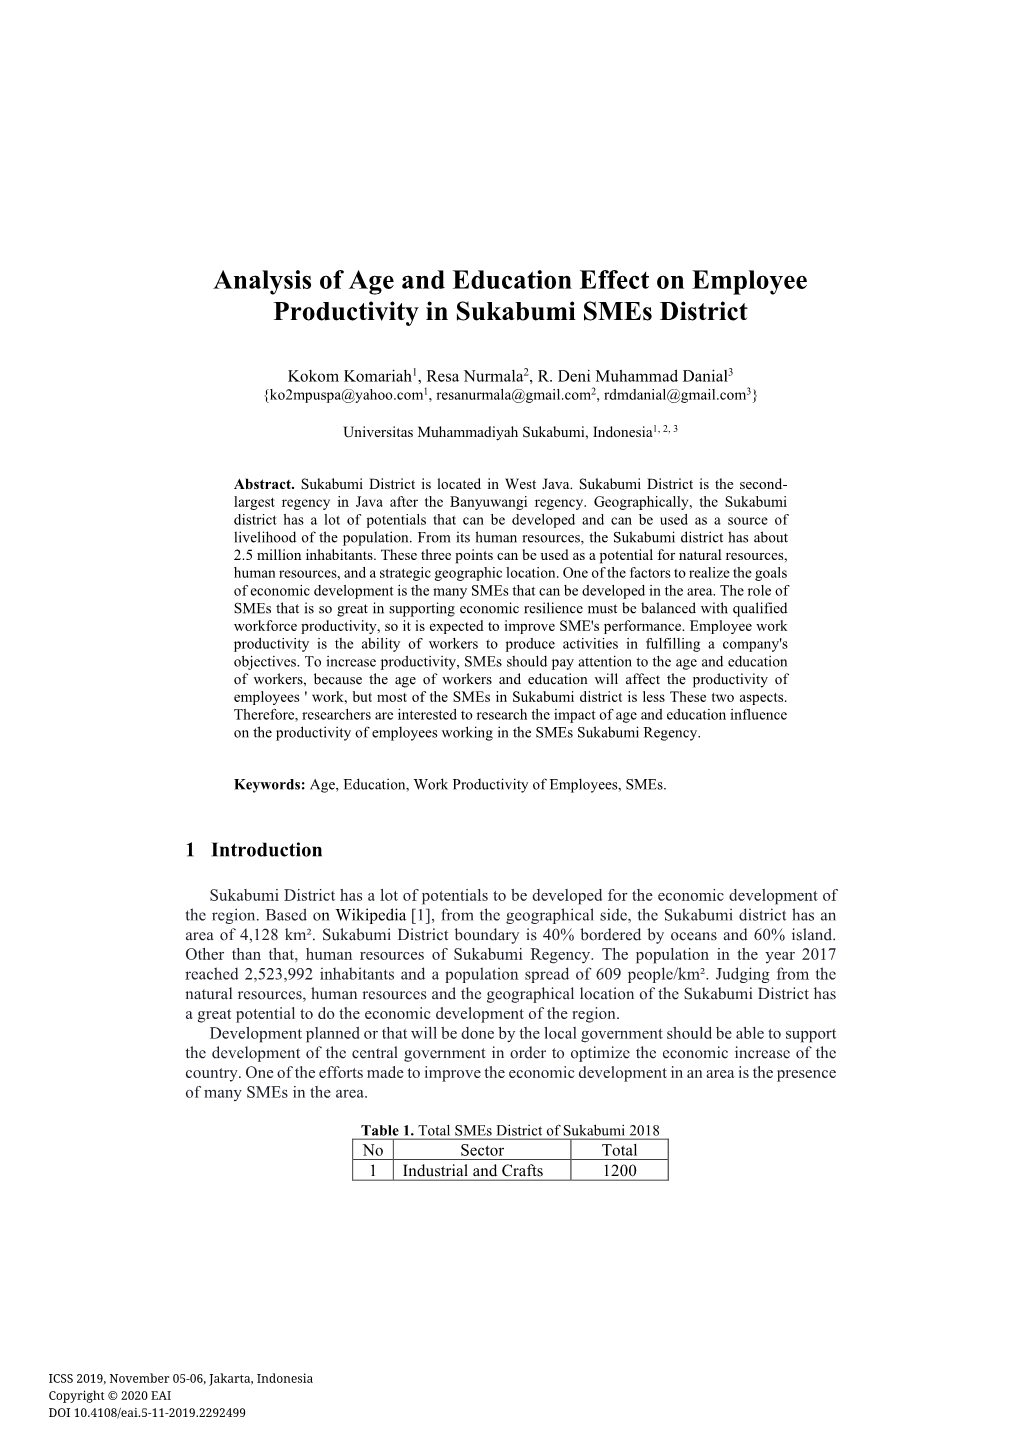 Analysis of Age and Education Effect on Employee Productivity in Sukabumi Smes District